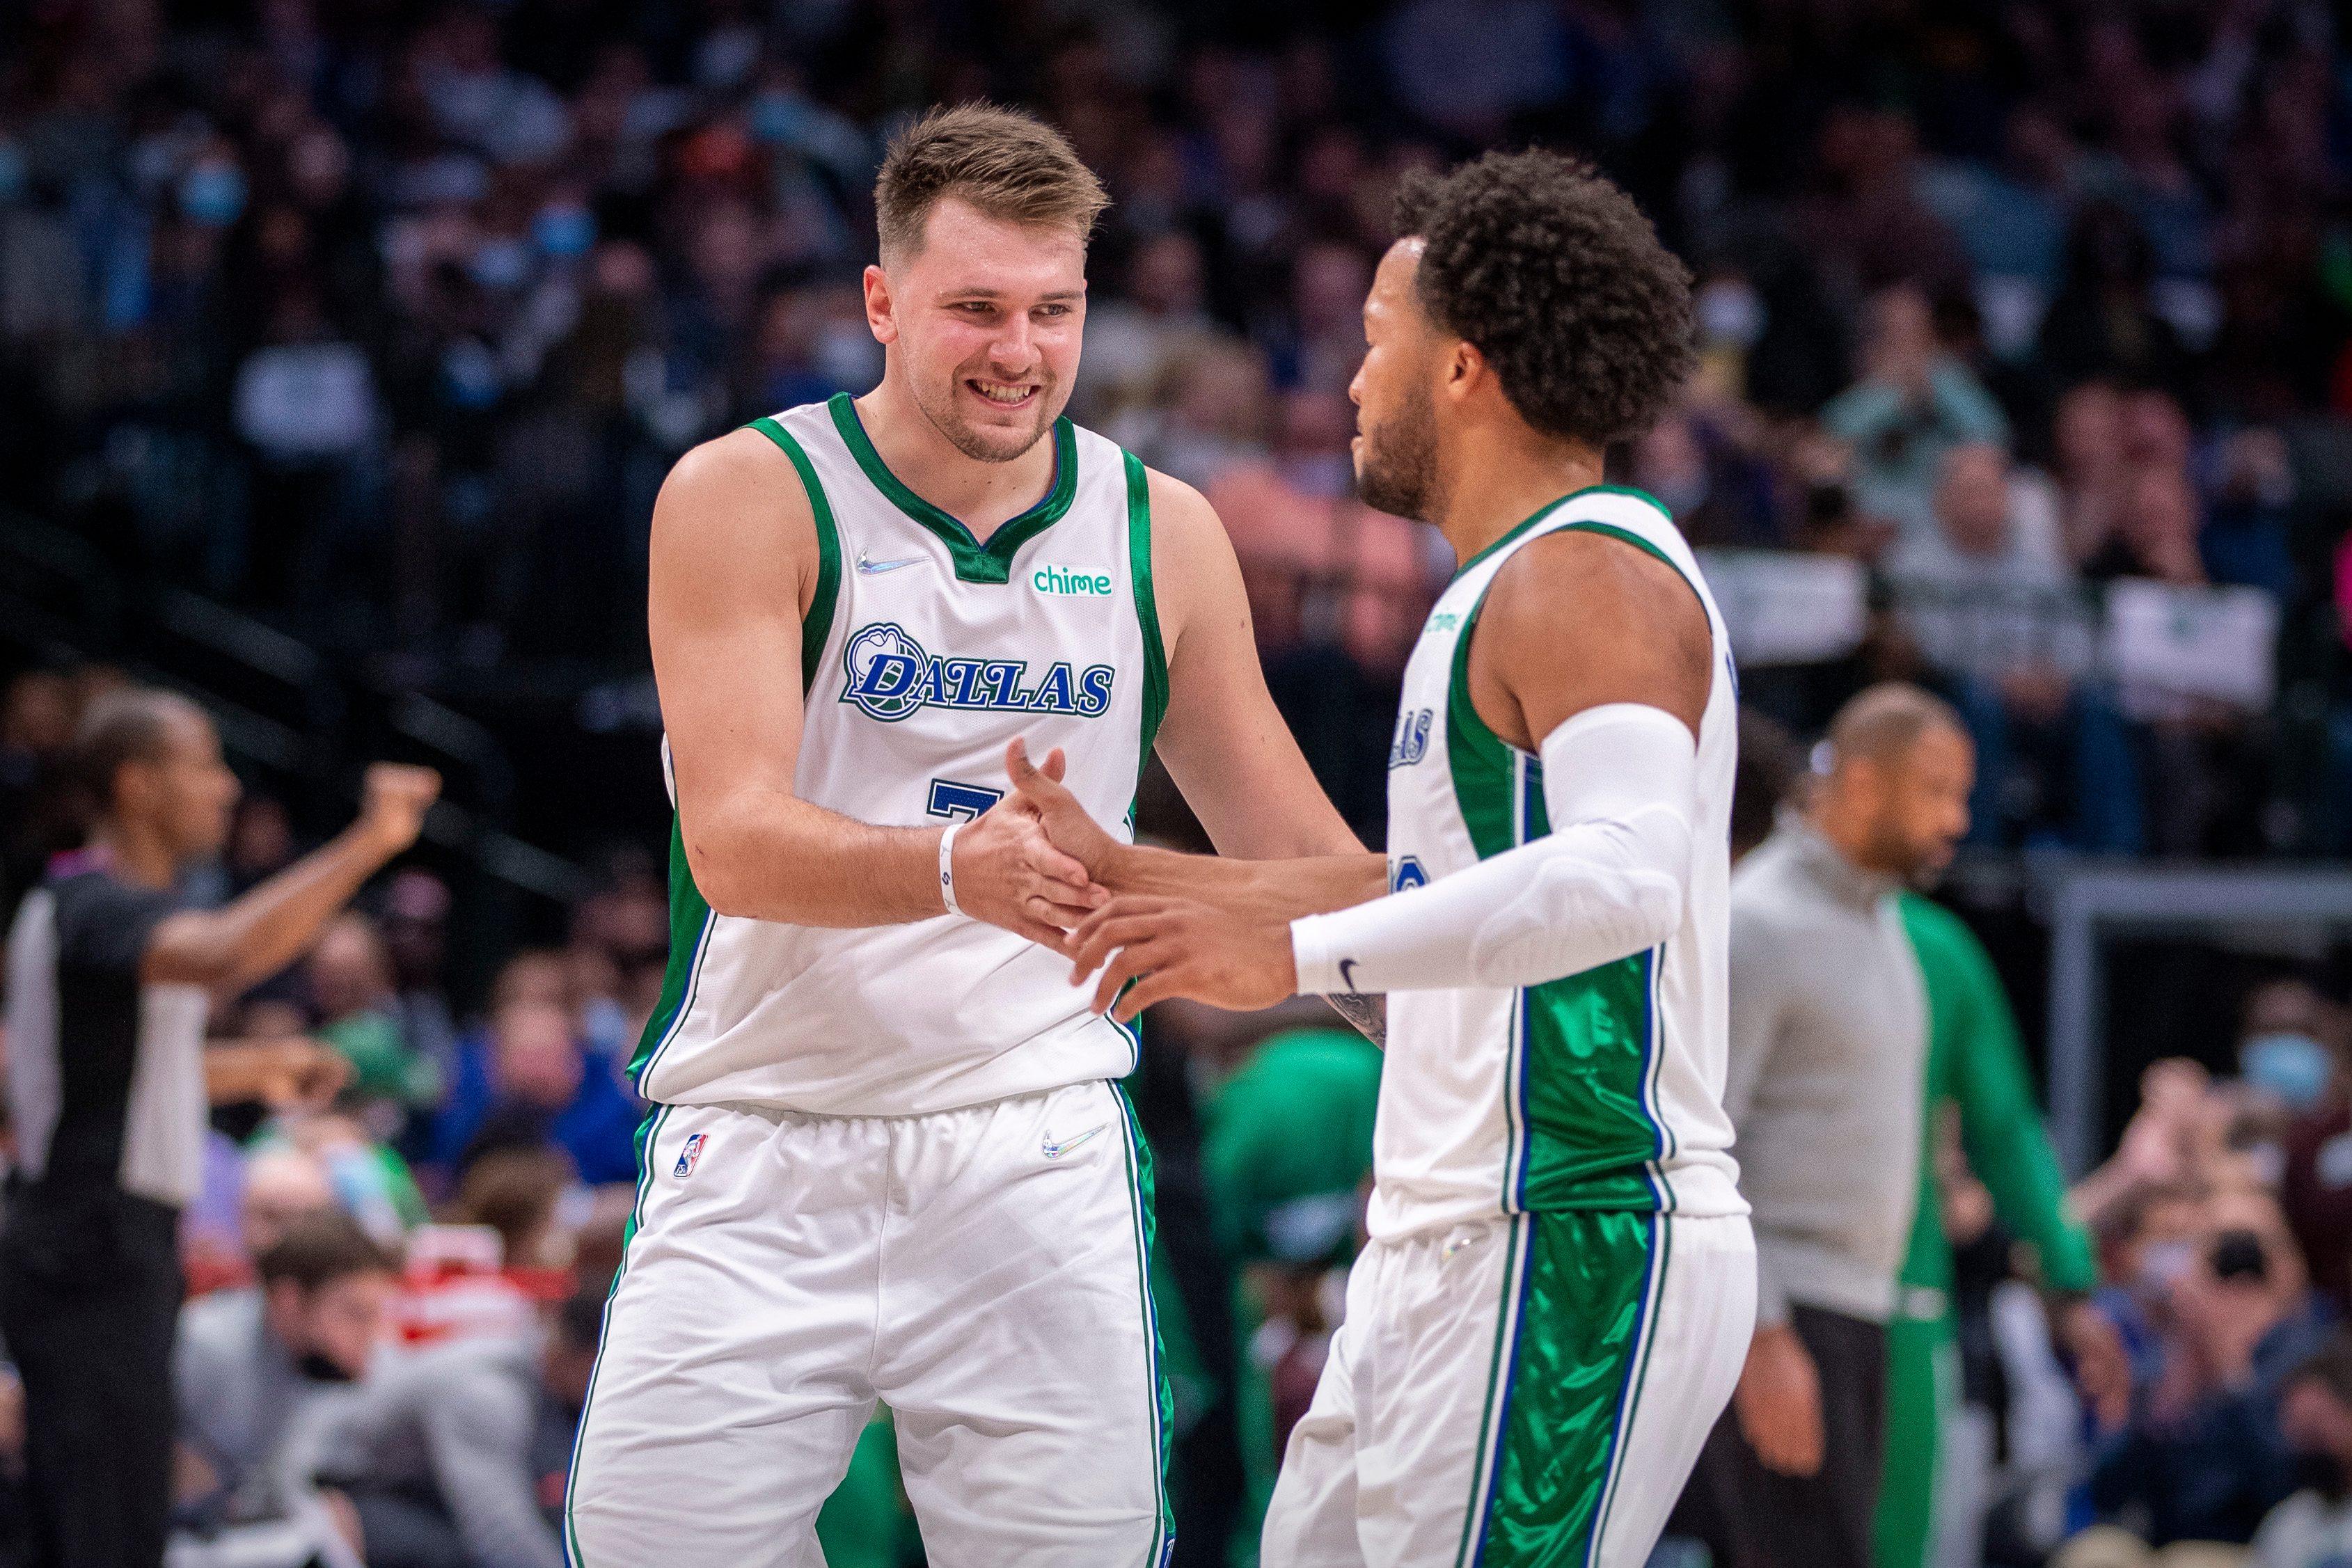 Luka Doncic’s triple as time expires sinks Celtics